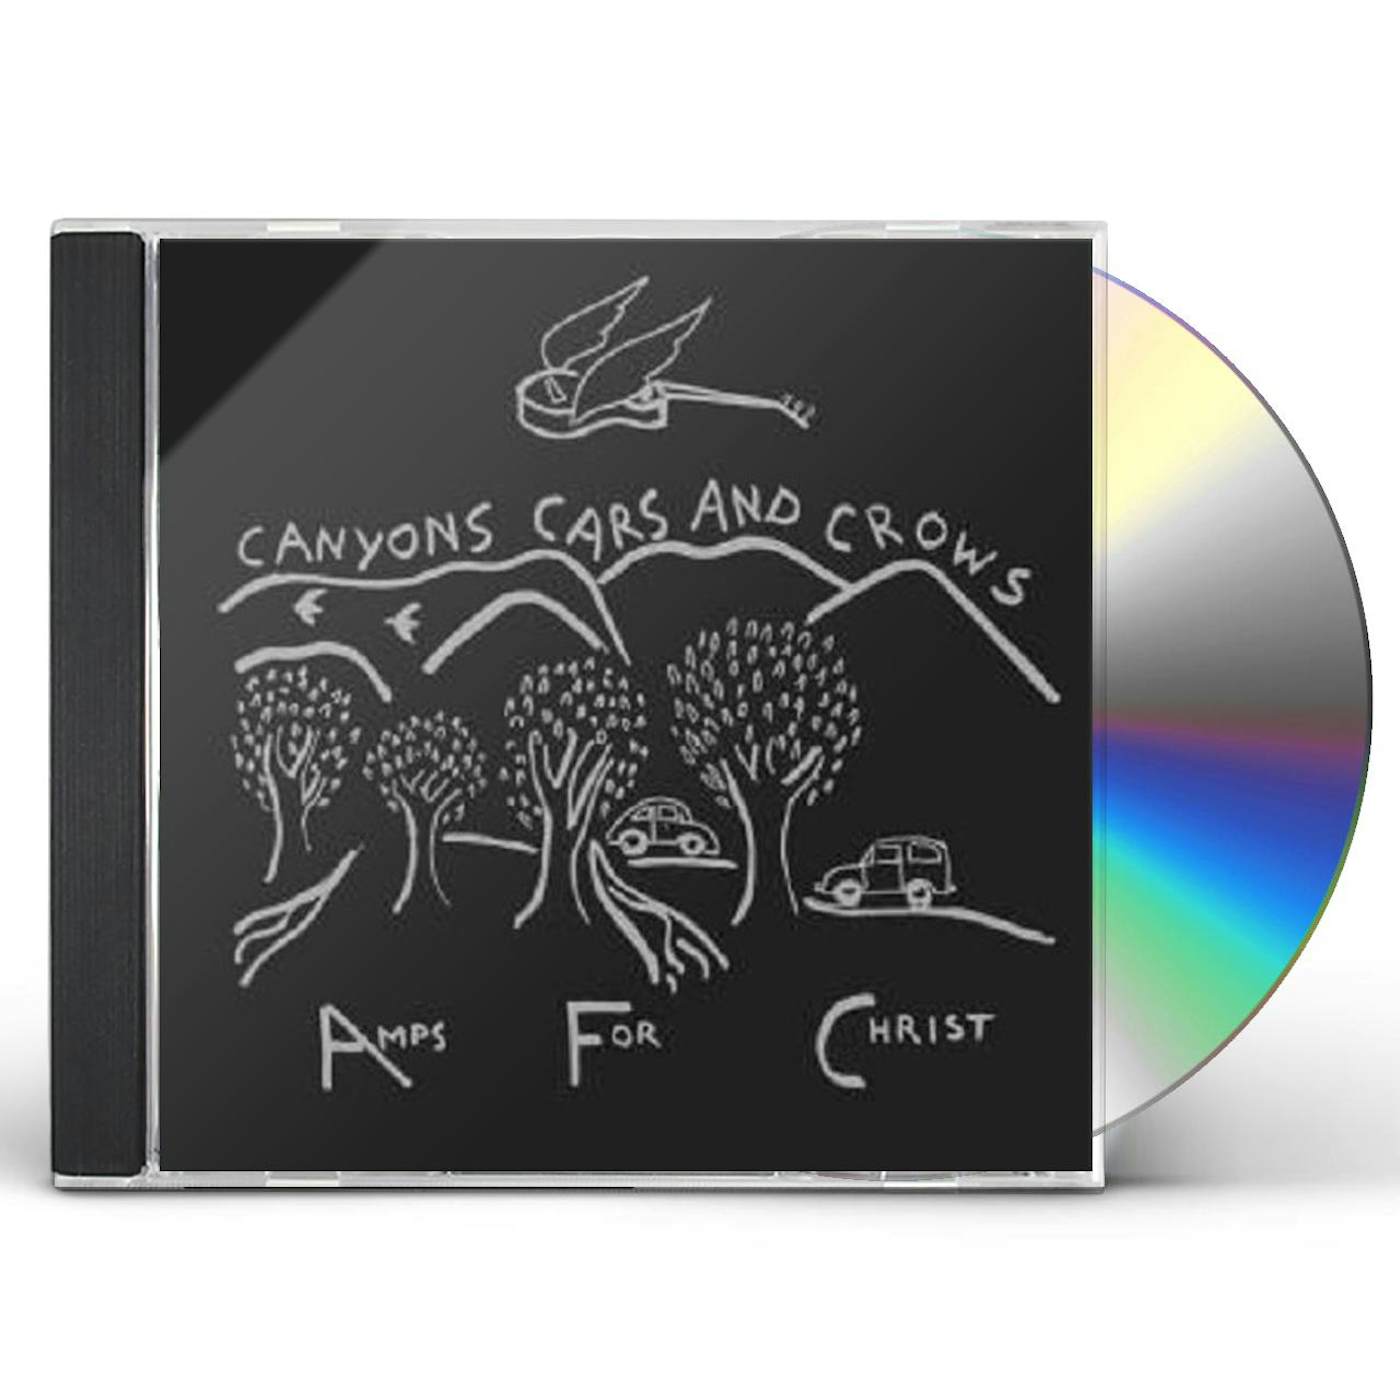 Amps For Christ CANYONS CARS & CROWS CD